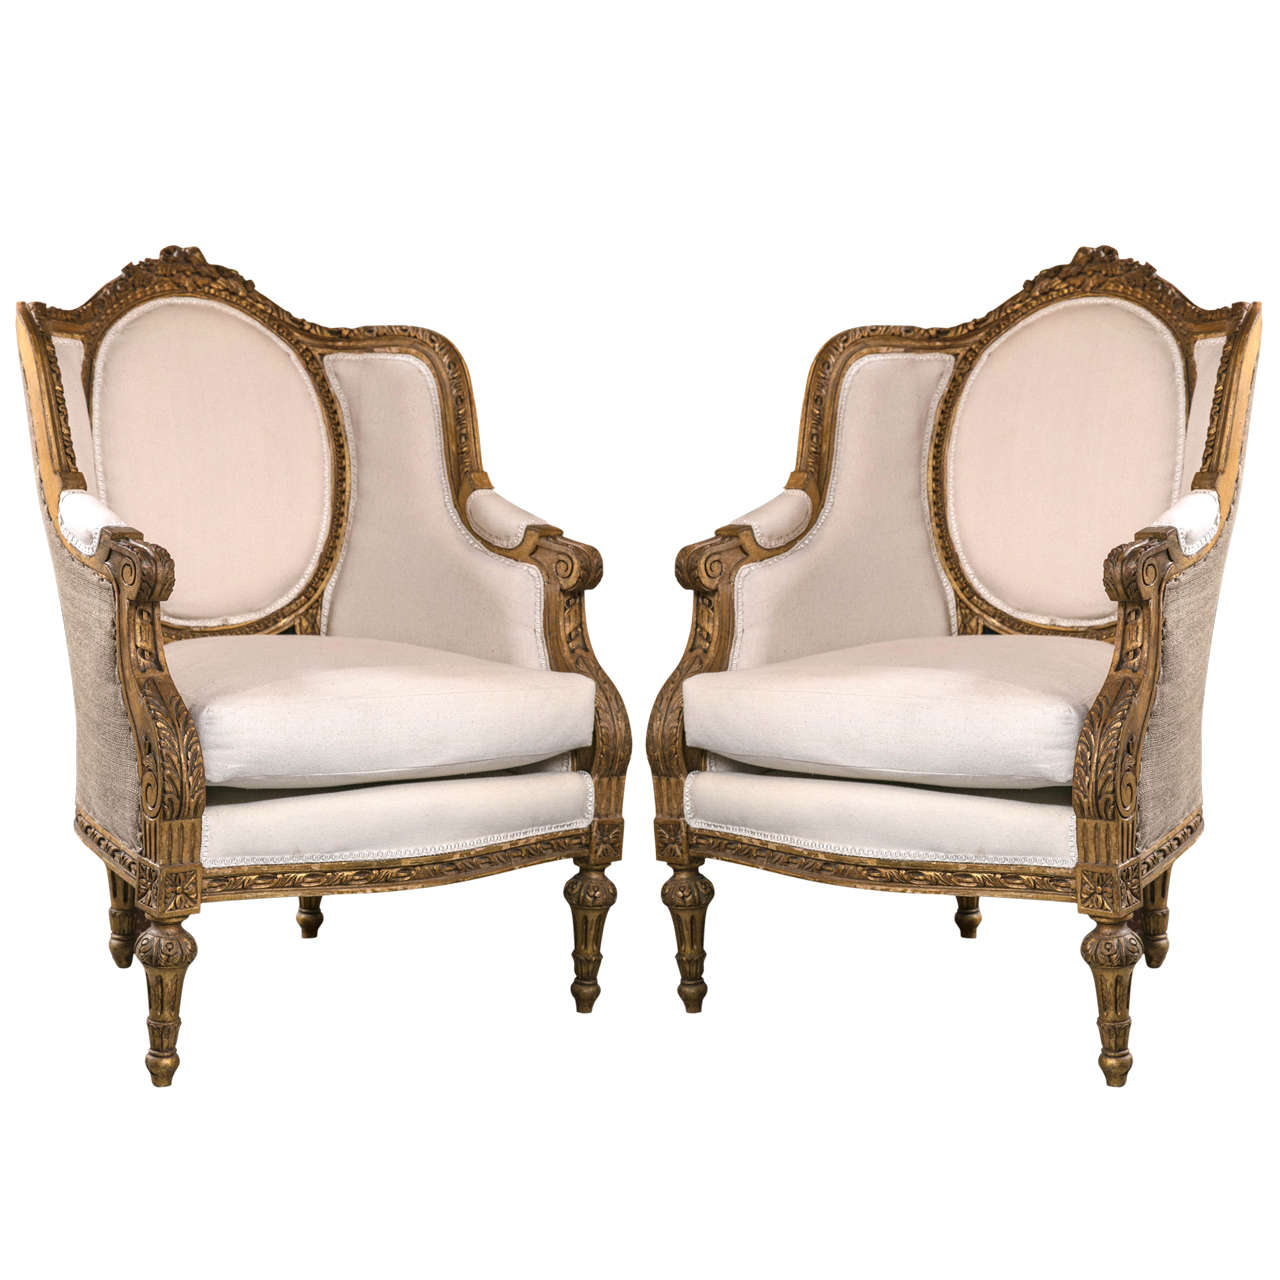 Pair of French Louis XVI Style Bergère Chairs